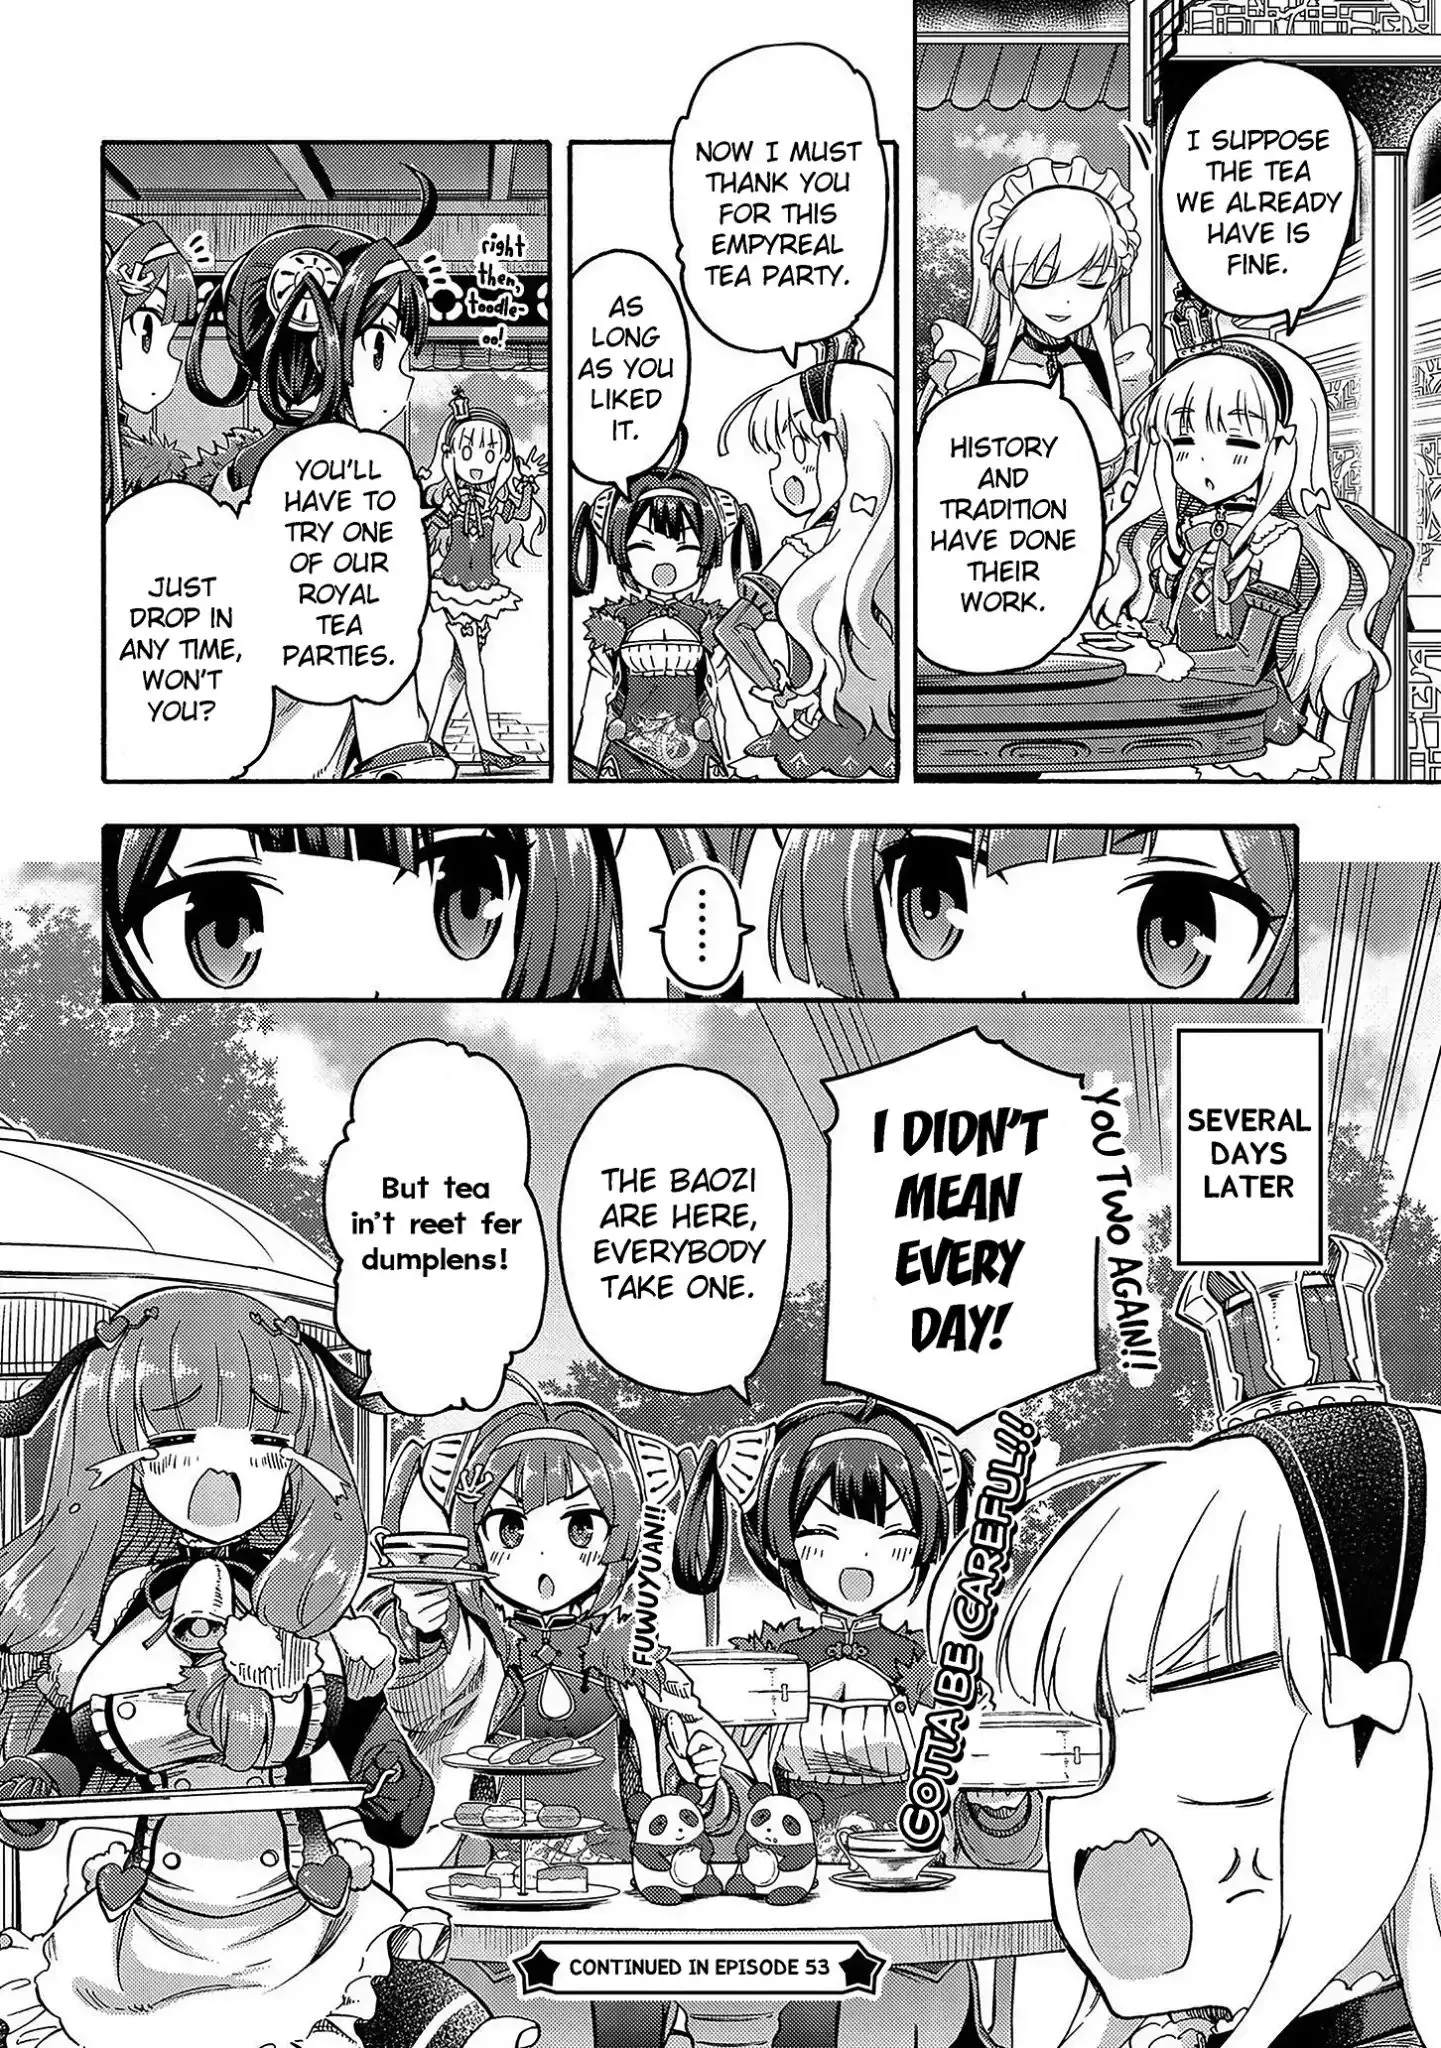 Azur Lane: Queen's Orders - 52 page 4-84878934